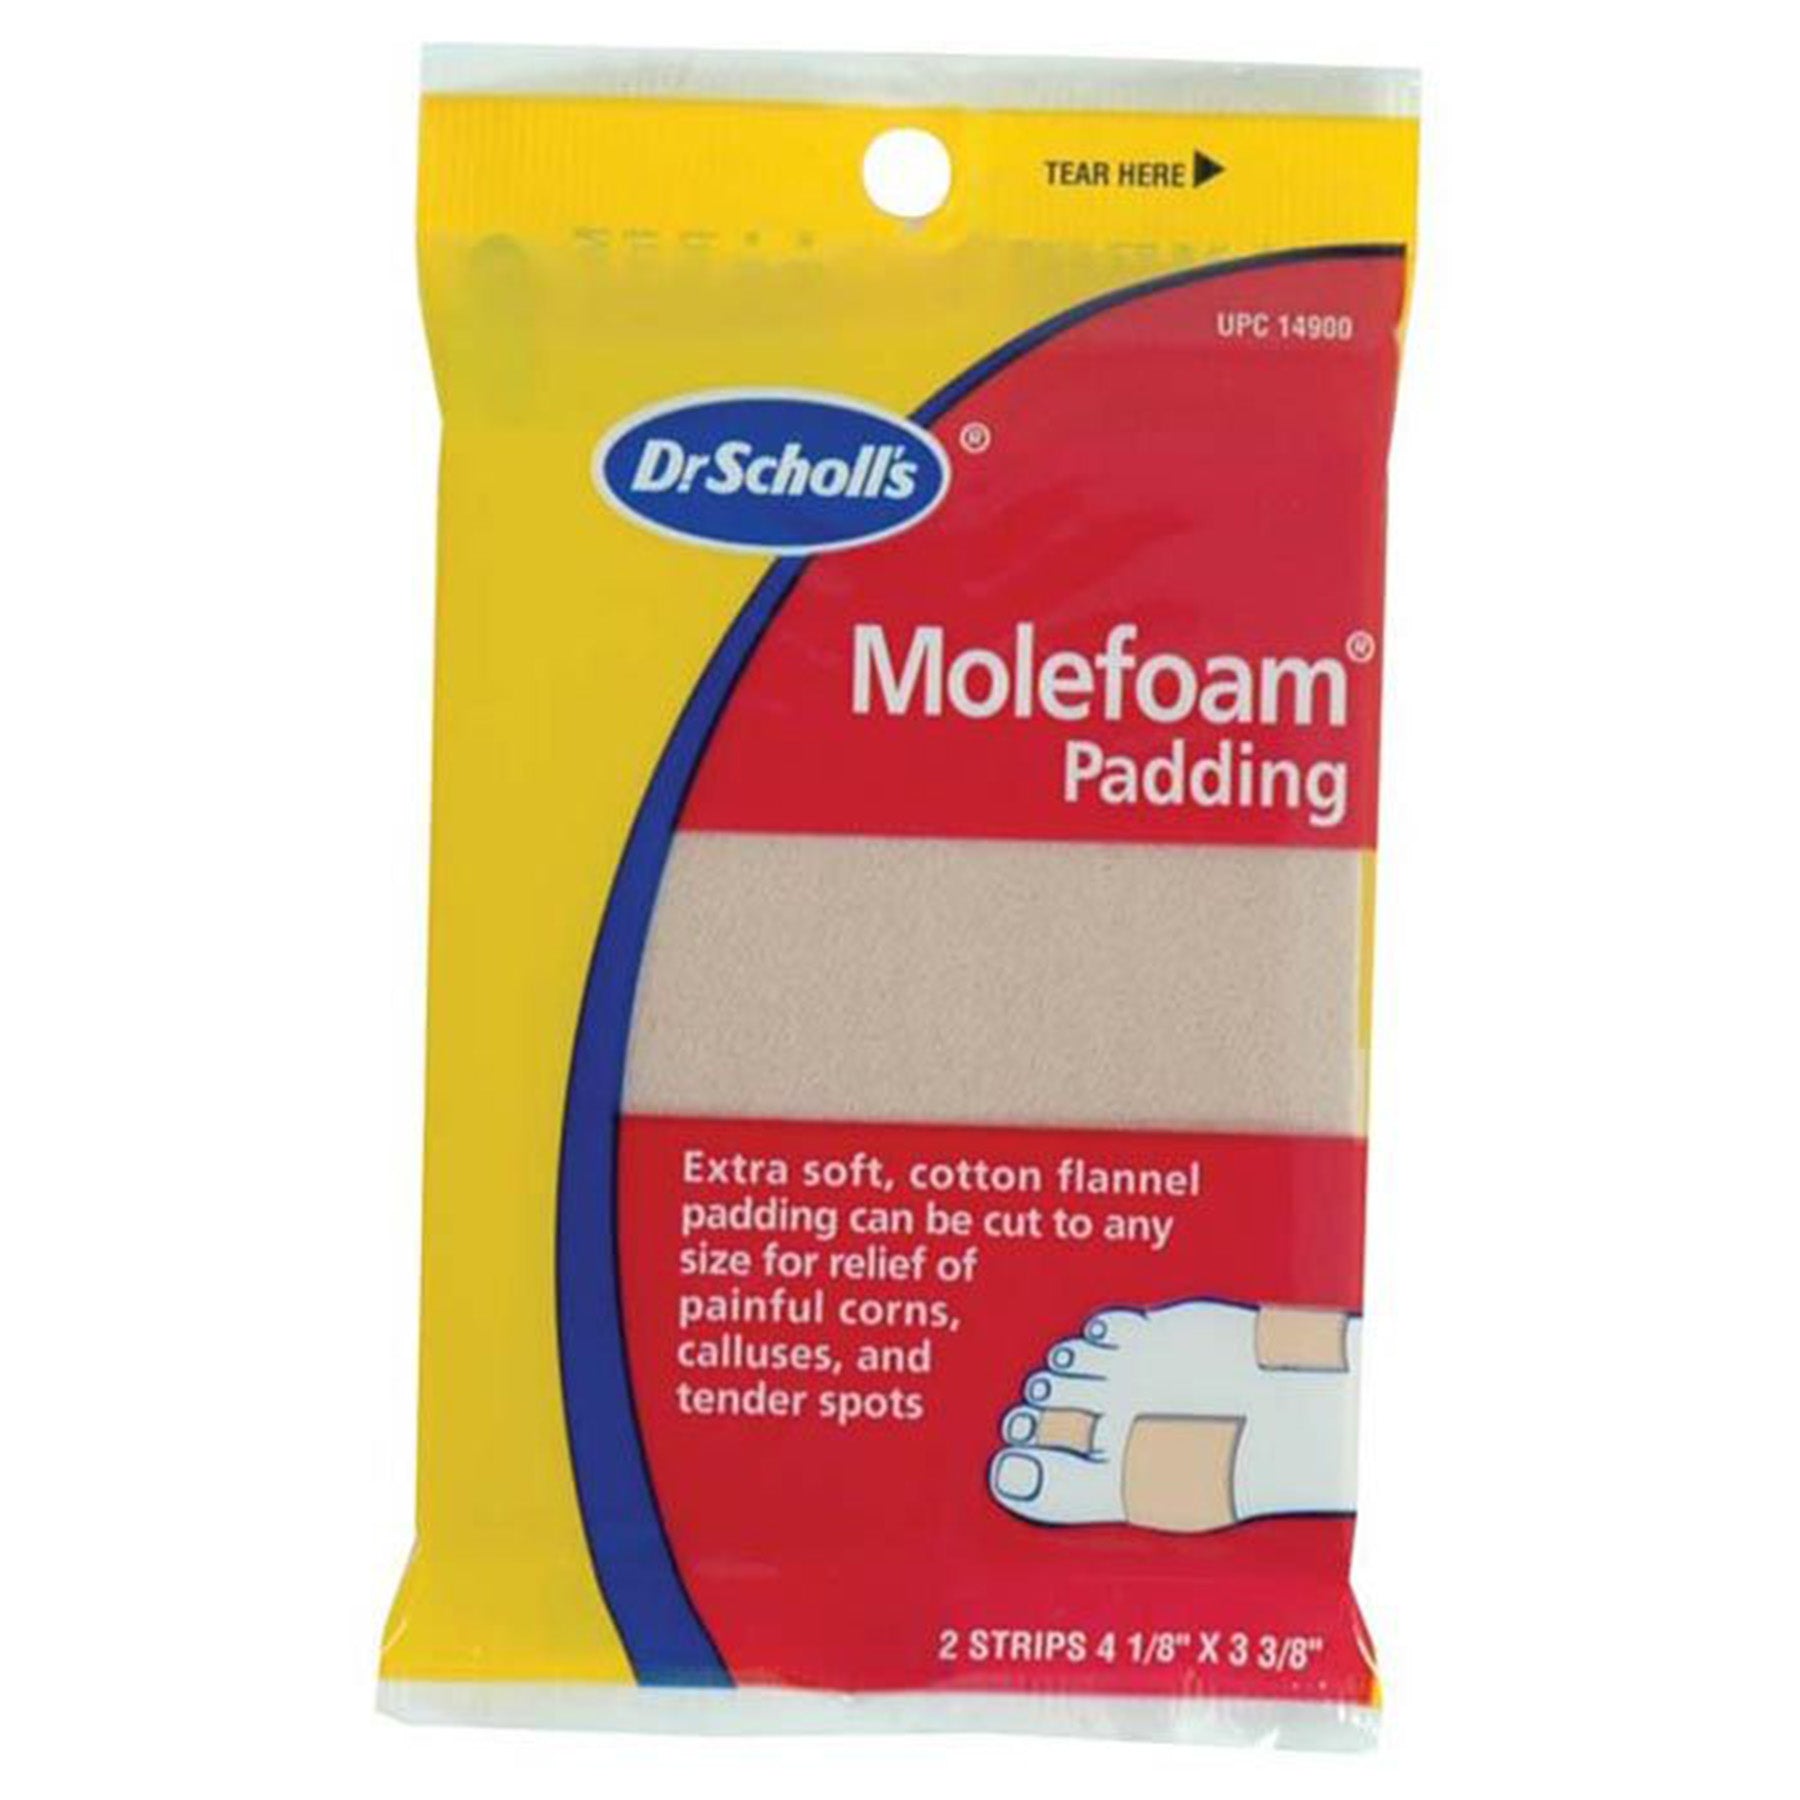 molefoam extra soft cotton flannel padding for relief of blisters, corns, calluses and tender spots, 2 strips 4 1/8" x 3 3/8"